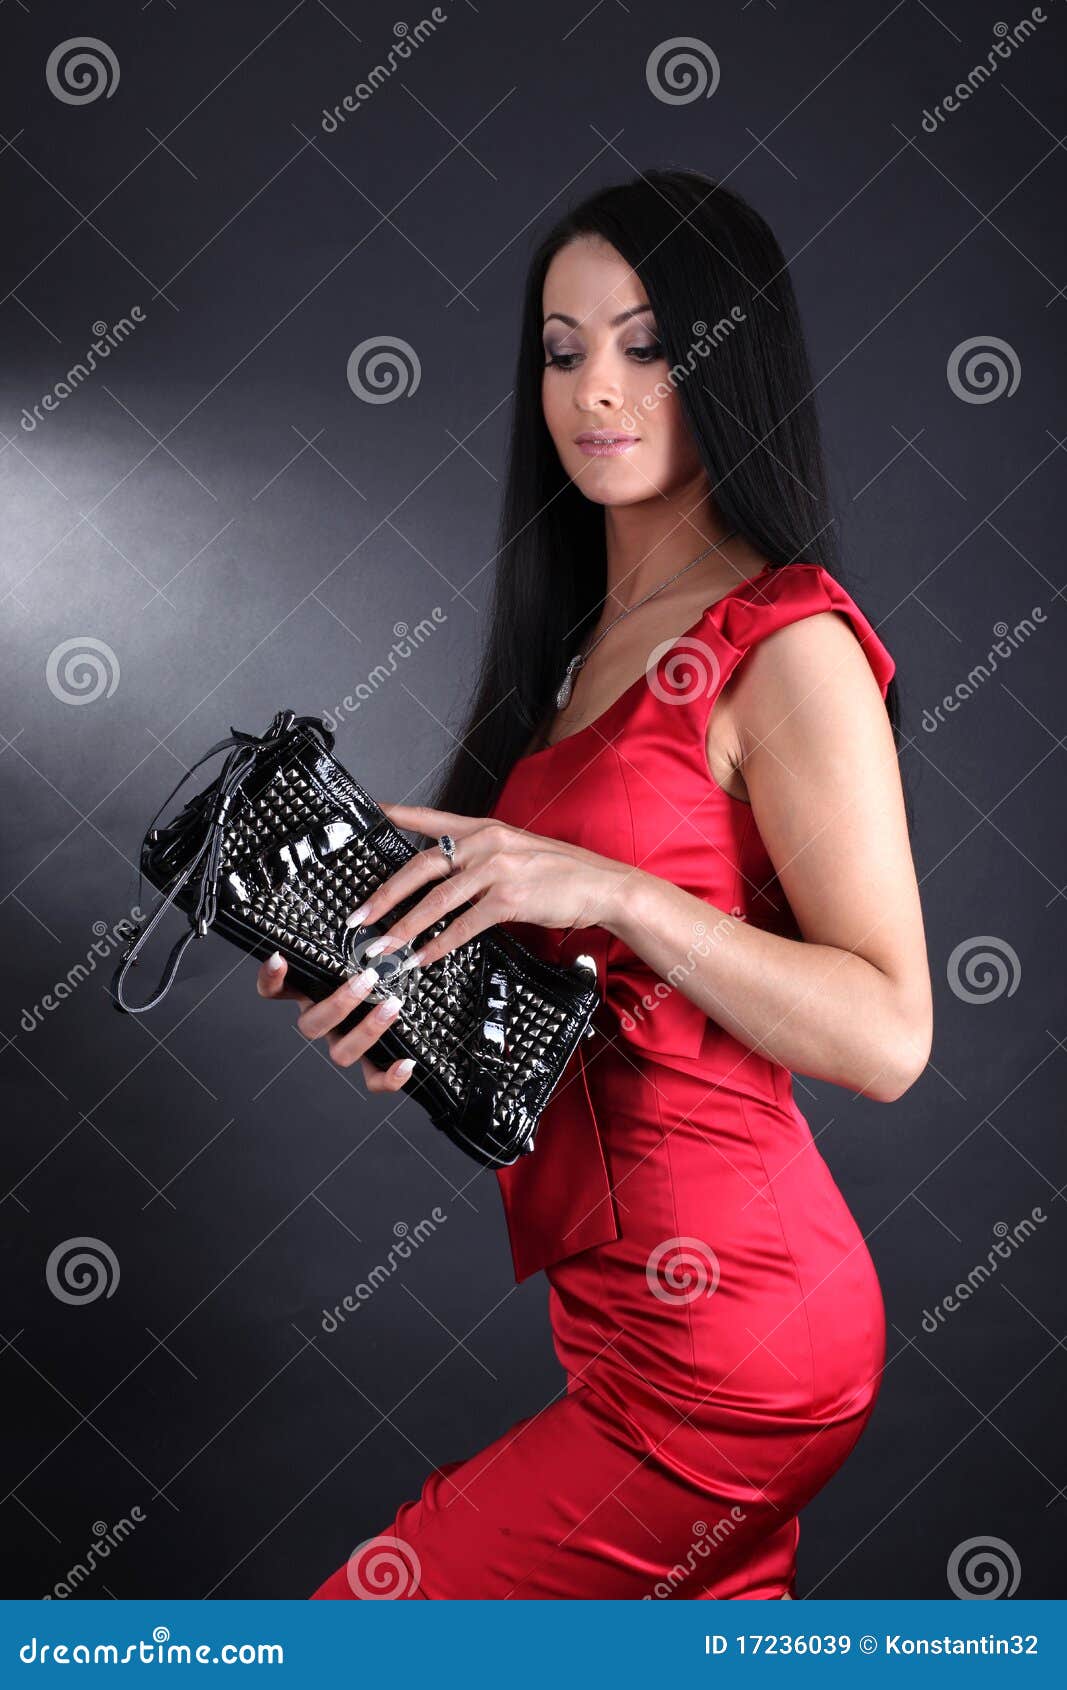 woman with clutch bag